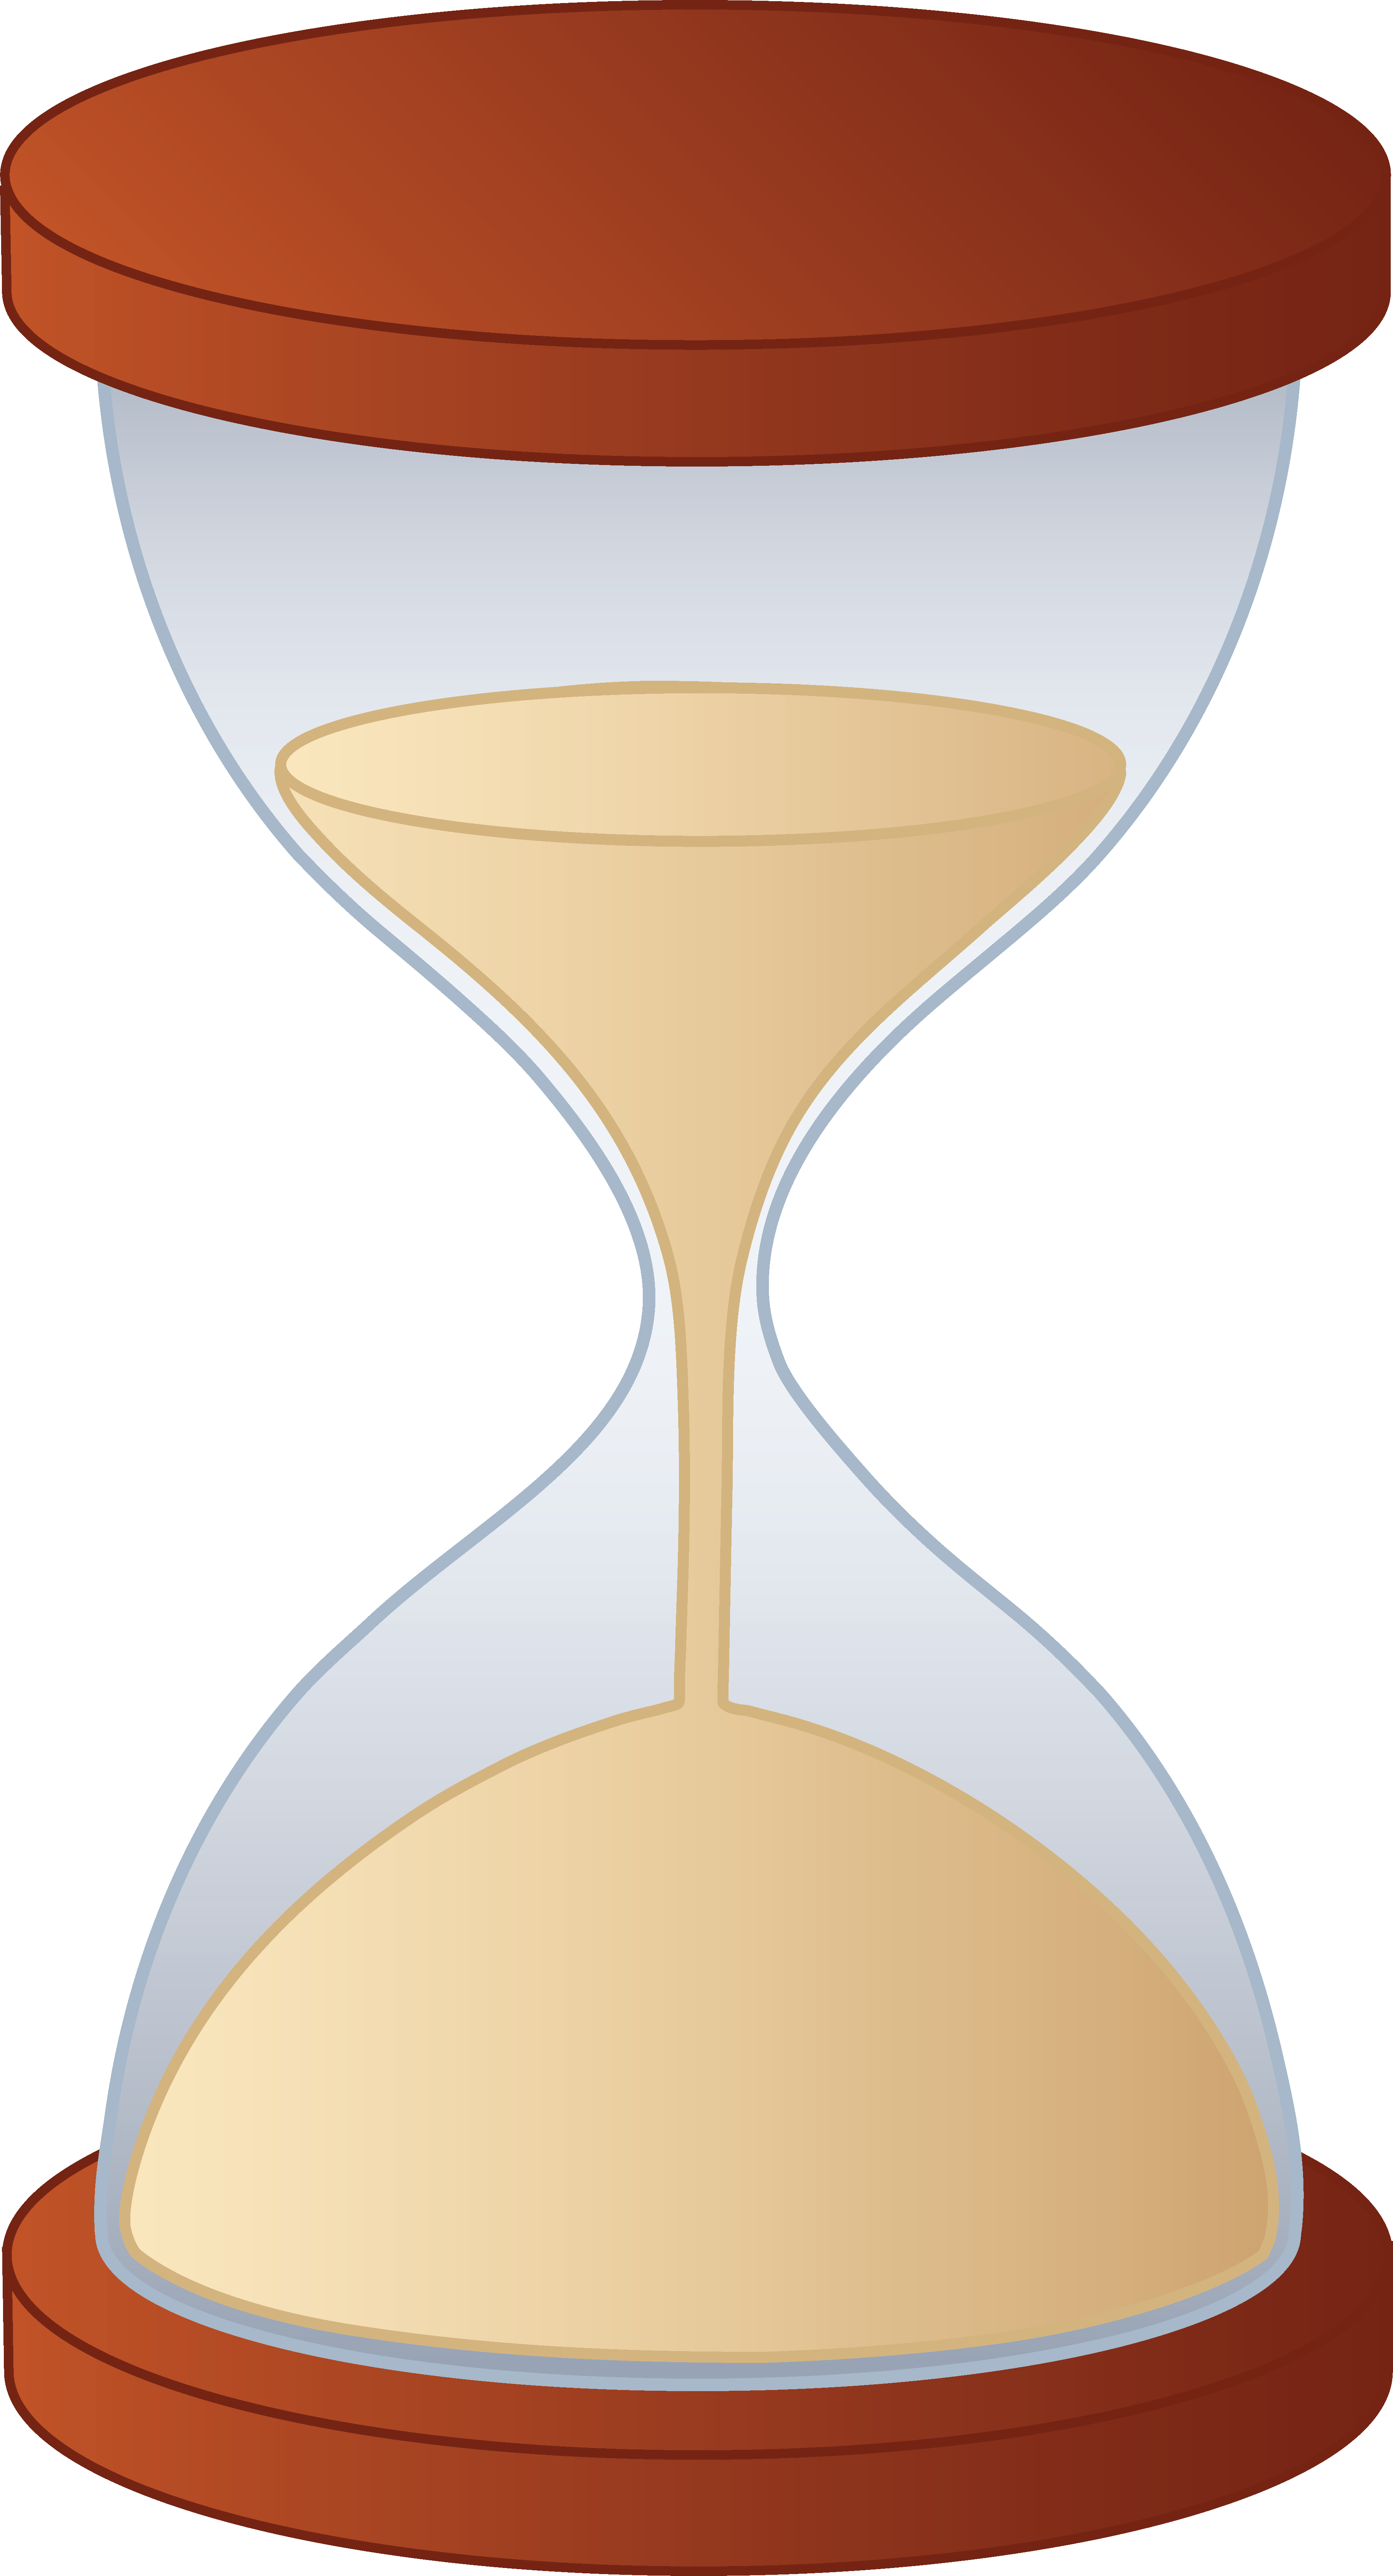 Hourglass Clipart PNG HD Quality